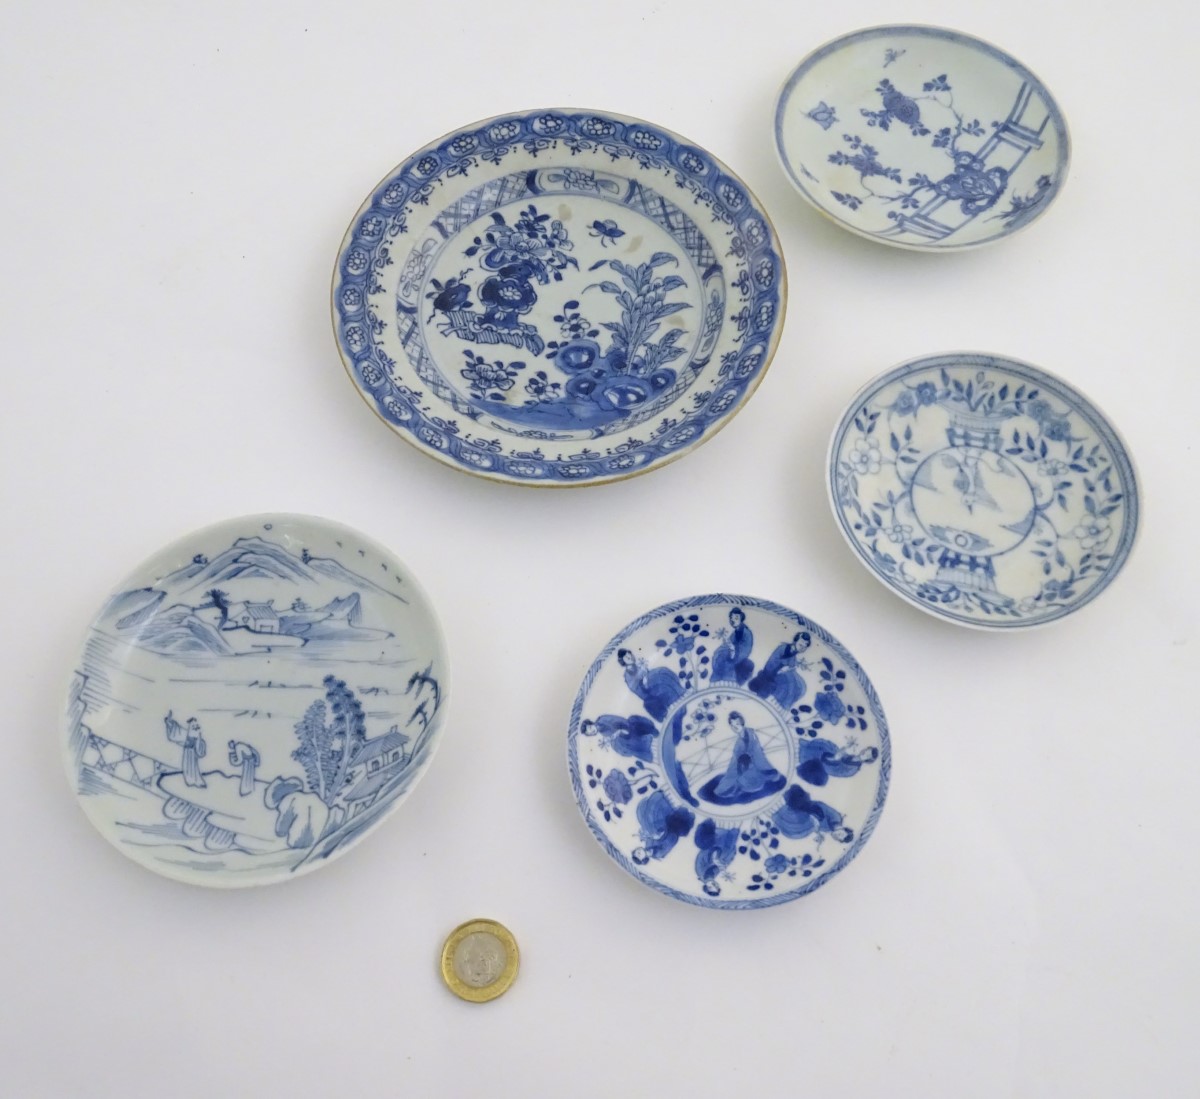 Five Chinese blue and white plates: A blue and white plate depicting butterflies and peonies on a - Image 12 of 15